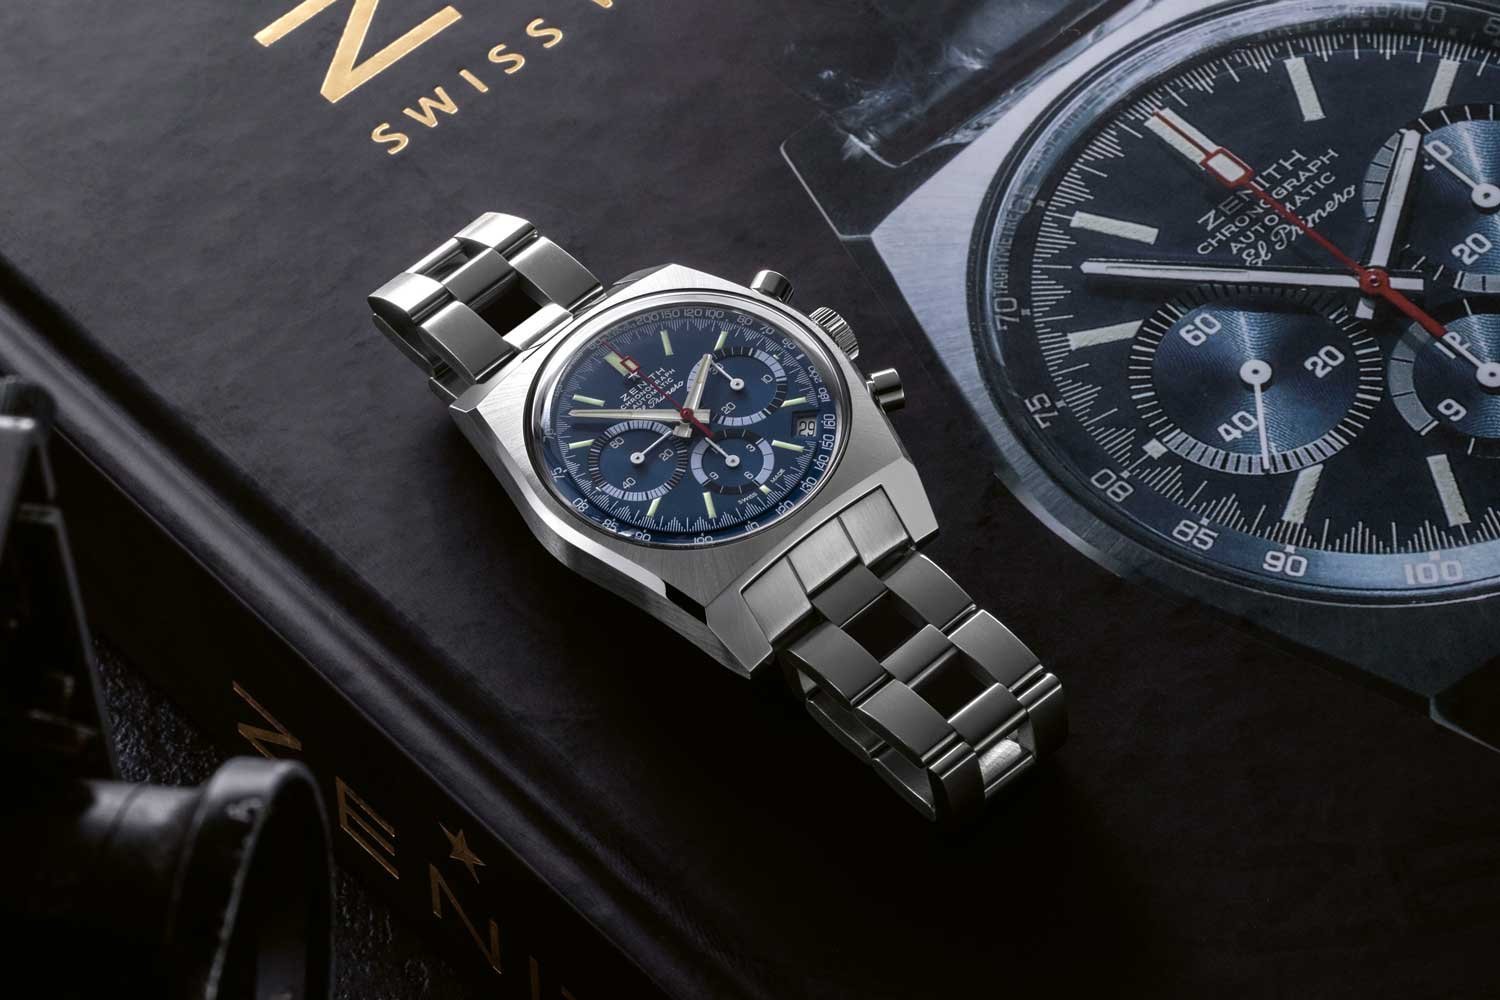 Breaking Down The Brand Zenith: The Watch Brand That Could Have Been Bigger Than Rolex